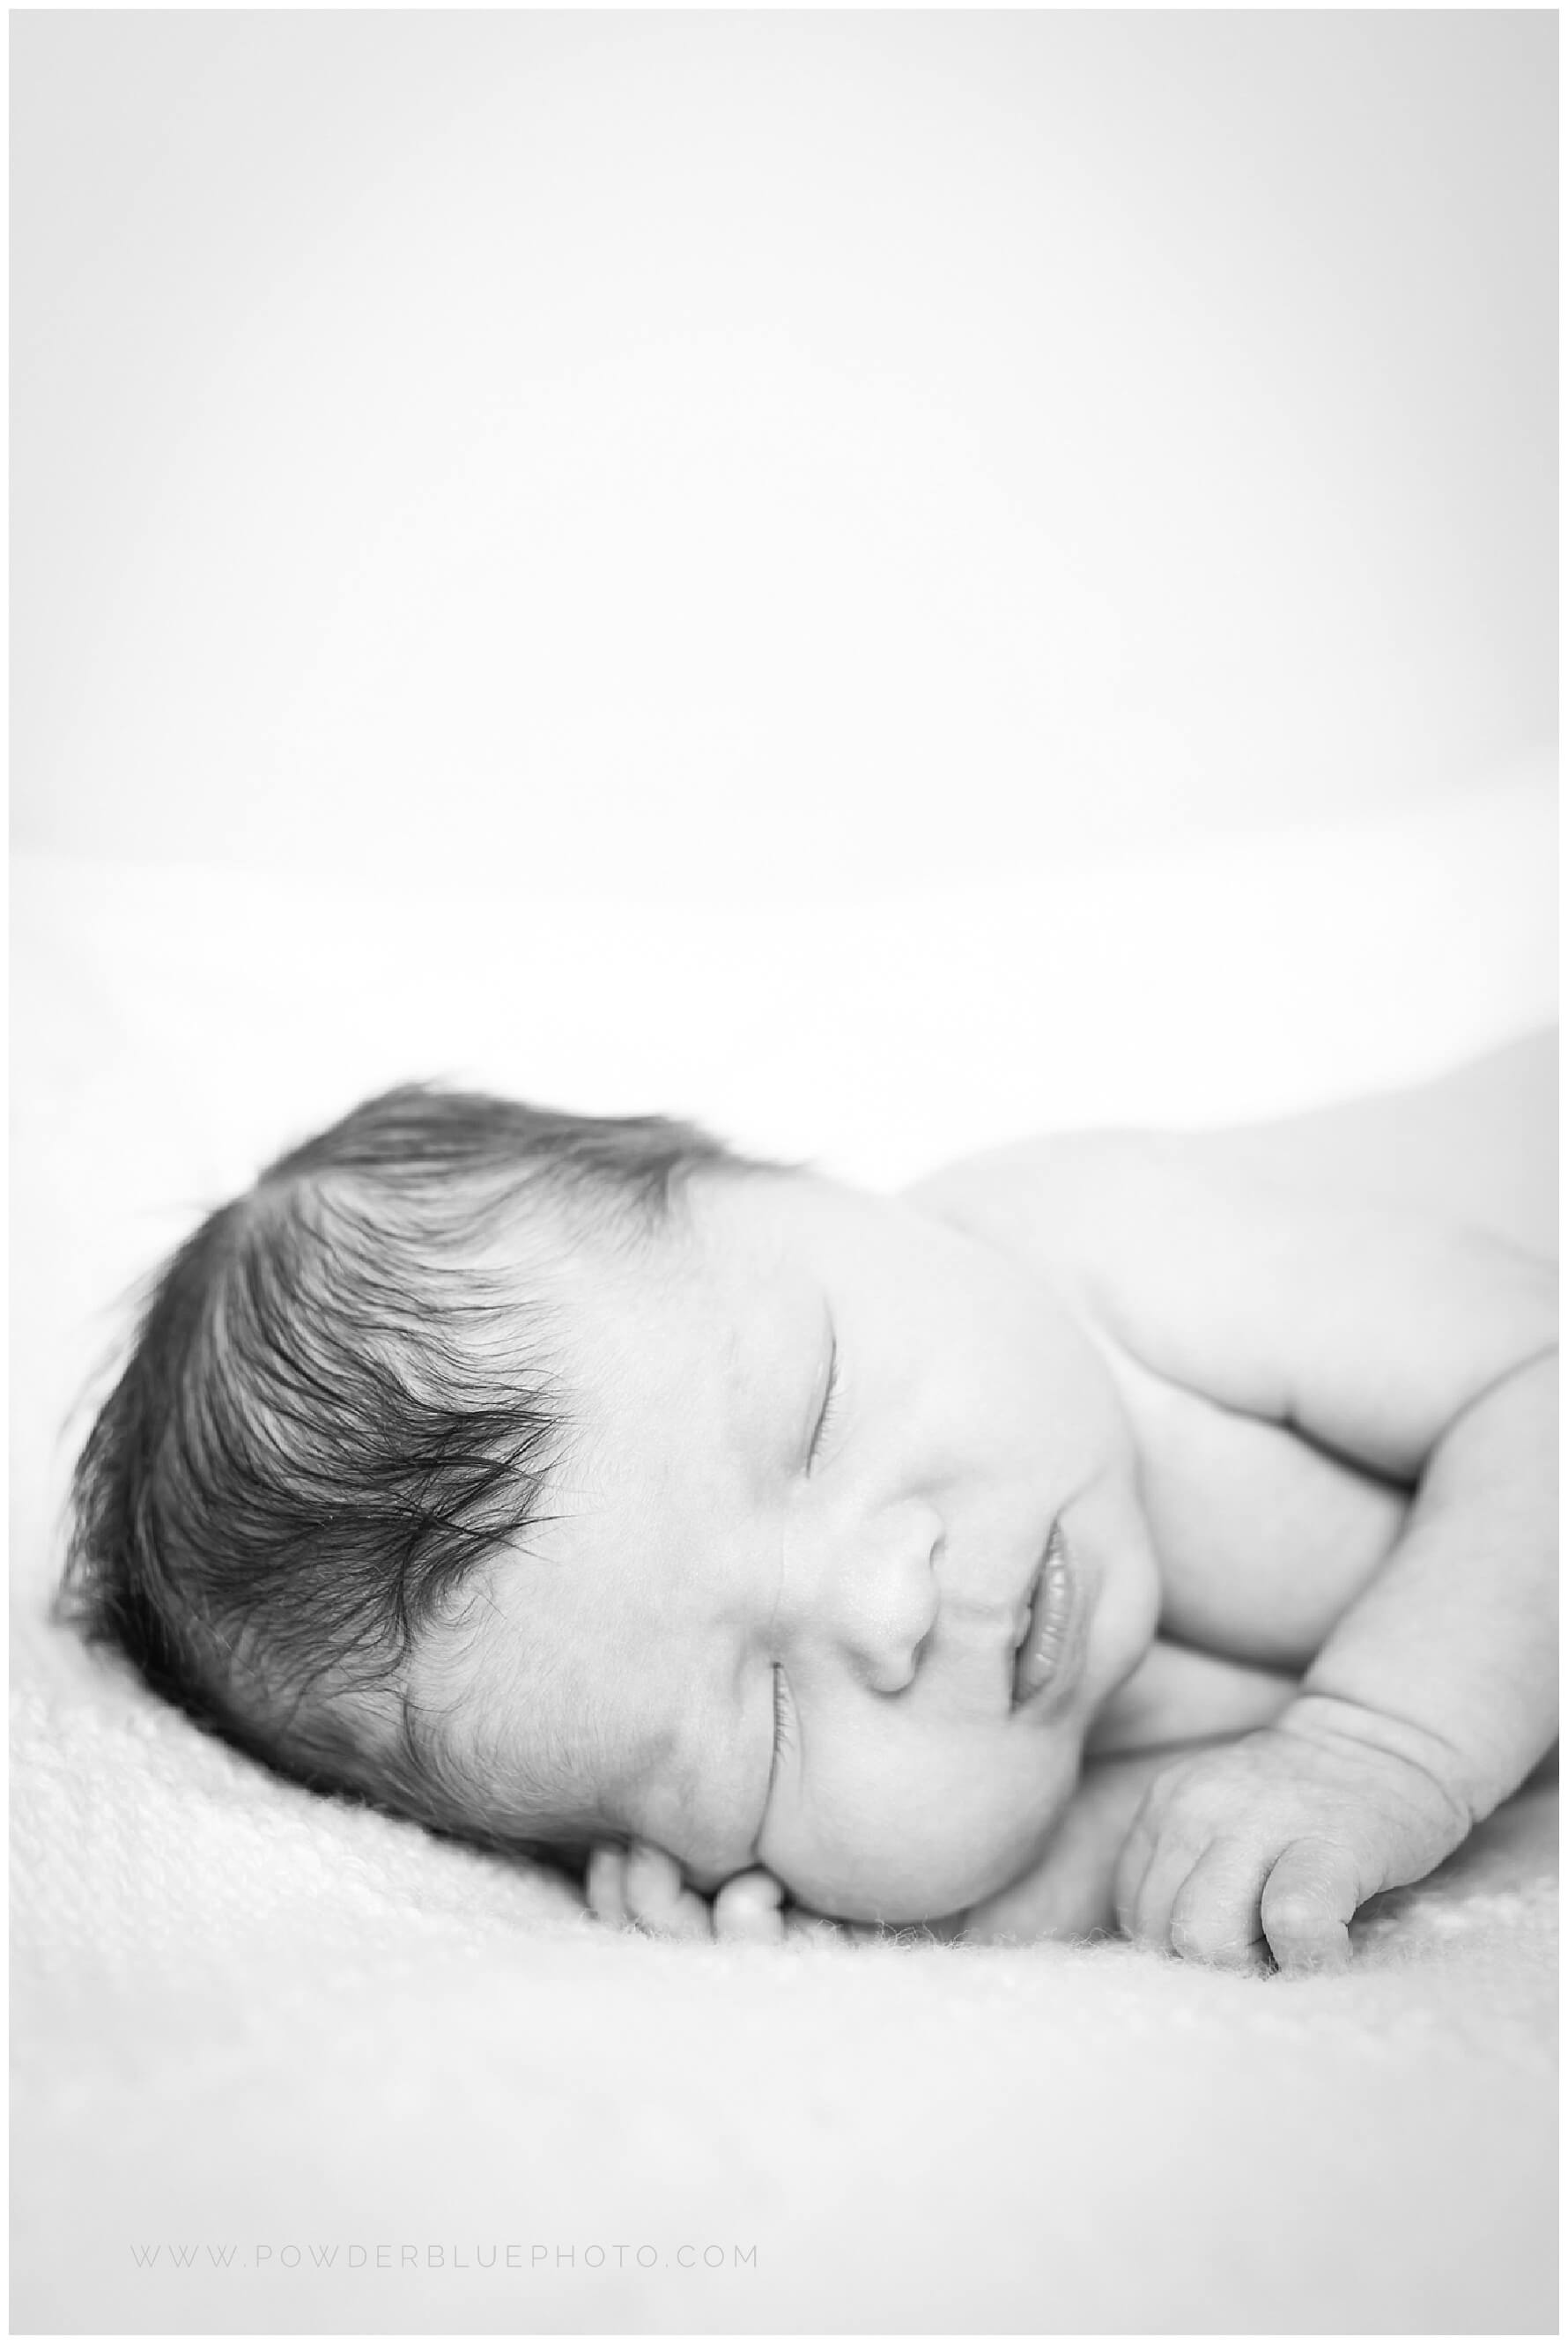 pittsburgh newborn photographer. simple, natural newborn portrait in studio on a white backdrop. baby girl. no props.